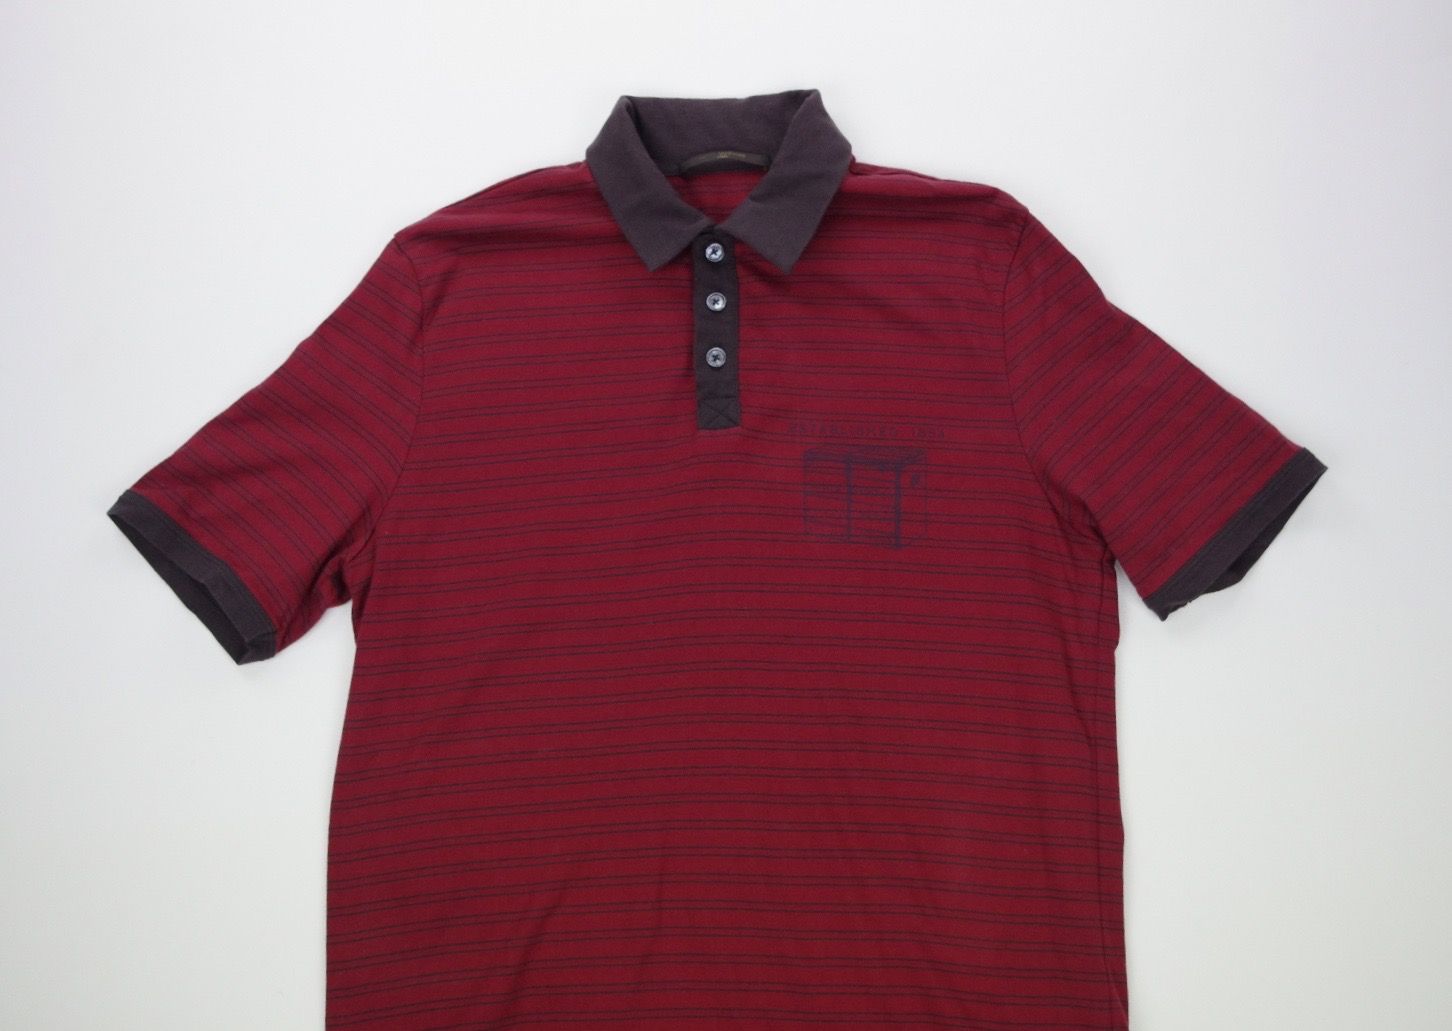 LOUIS VUITTON red striped Polo shirt LV logo trunk Small Slim fit Made in Italy | eBay